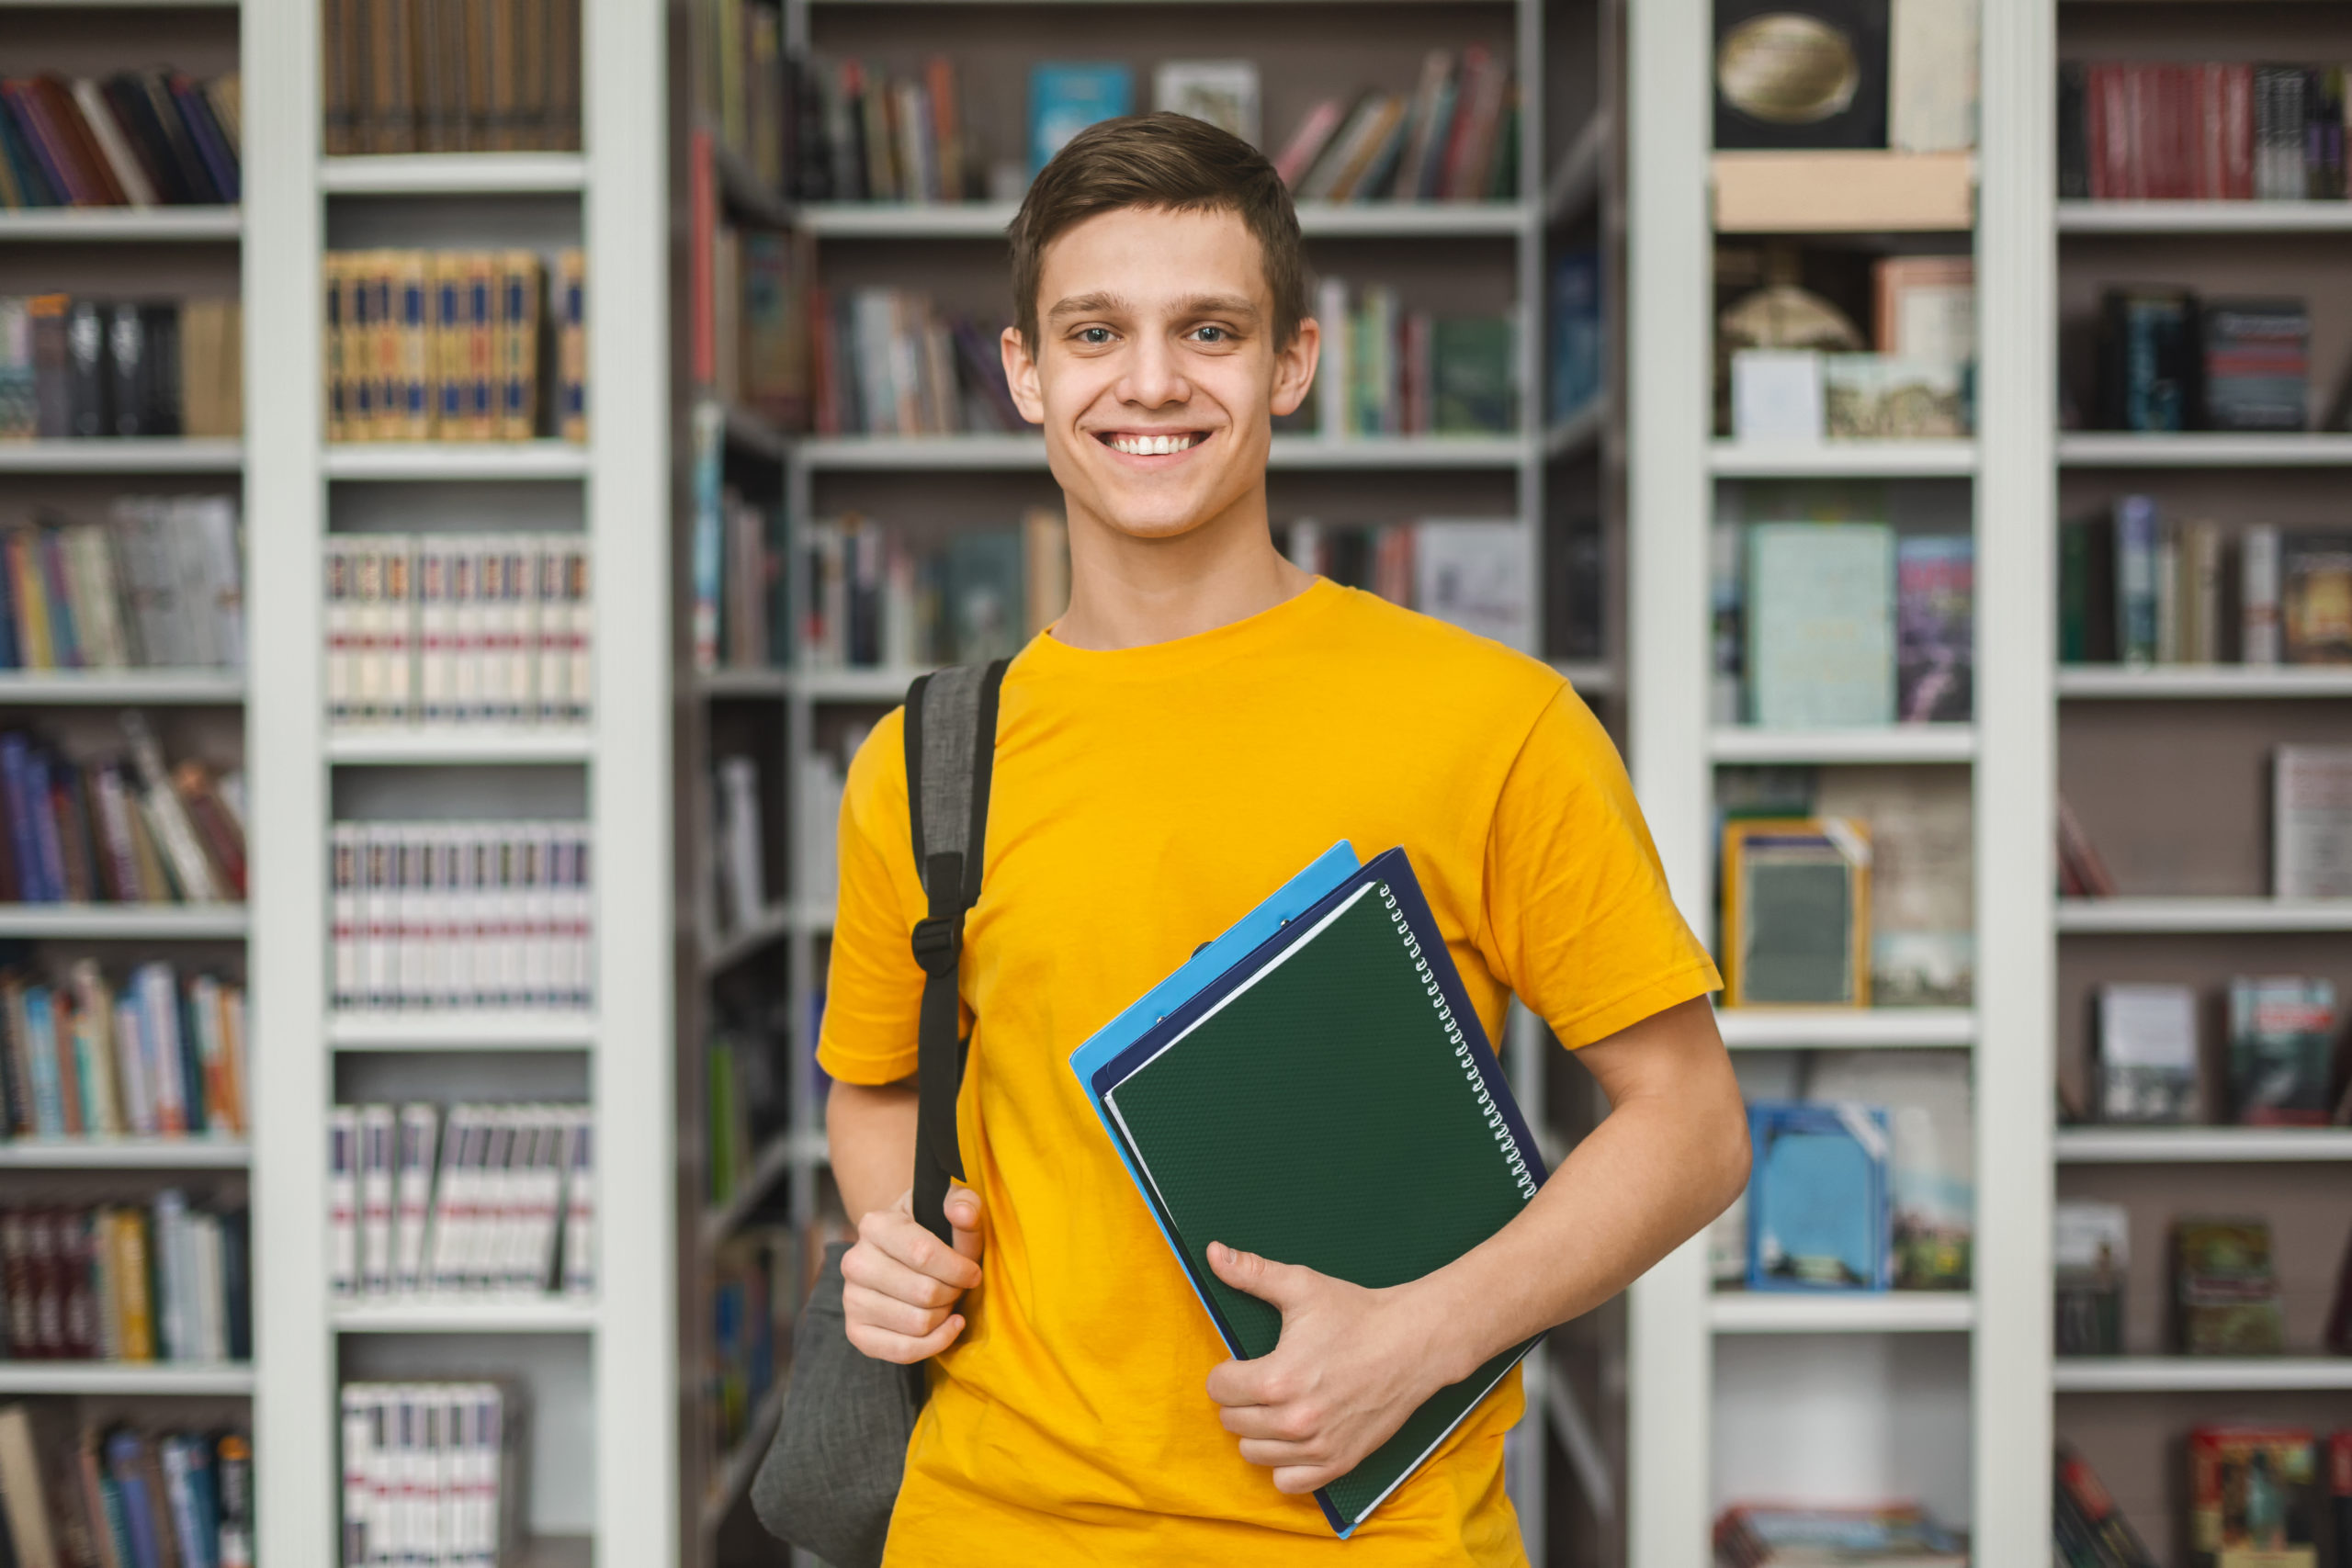 habits for success for high school students